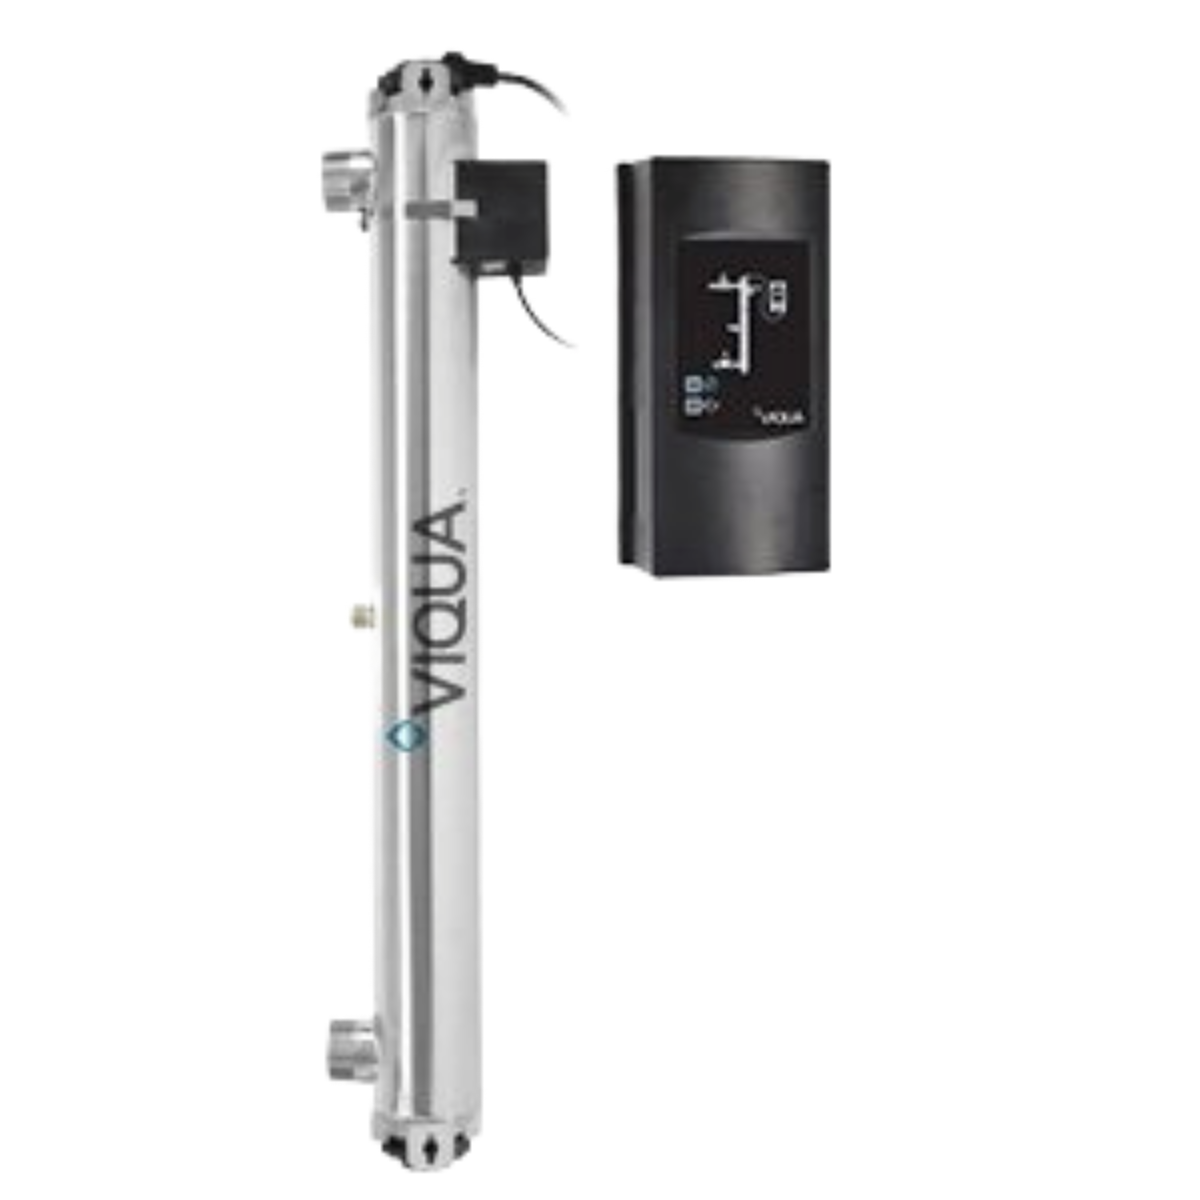 K Pro UV Water Disinfection System